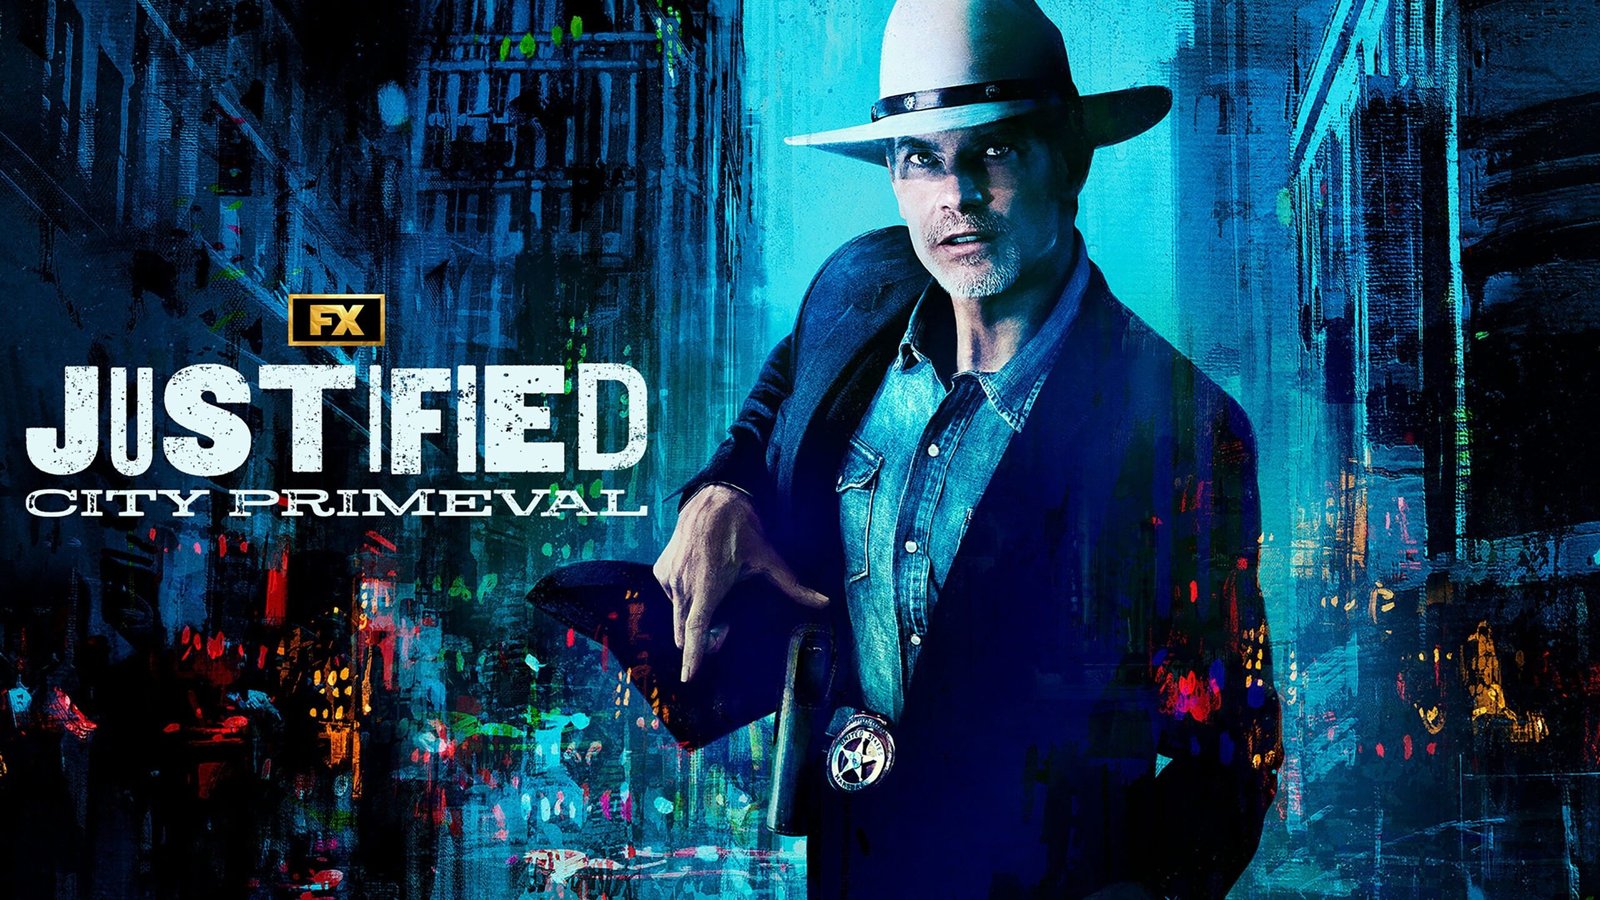 Justified City Primeval Episodes Guide